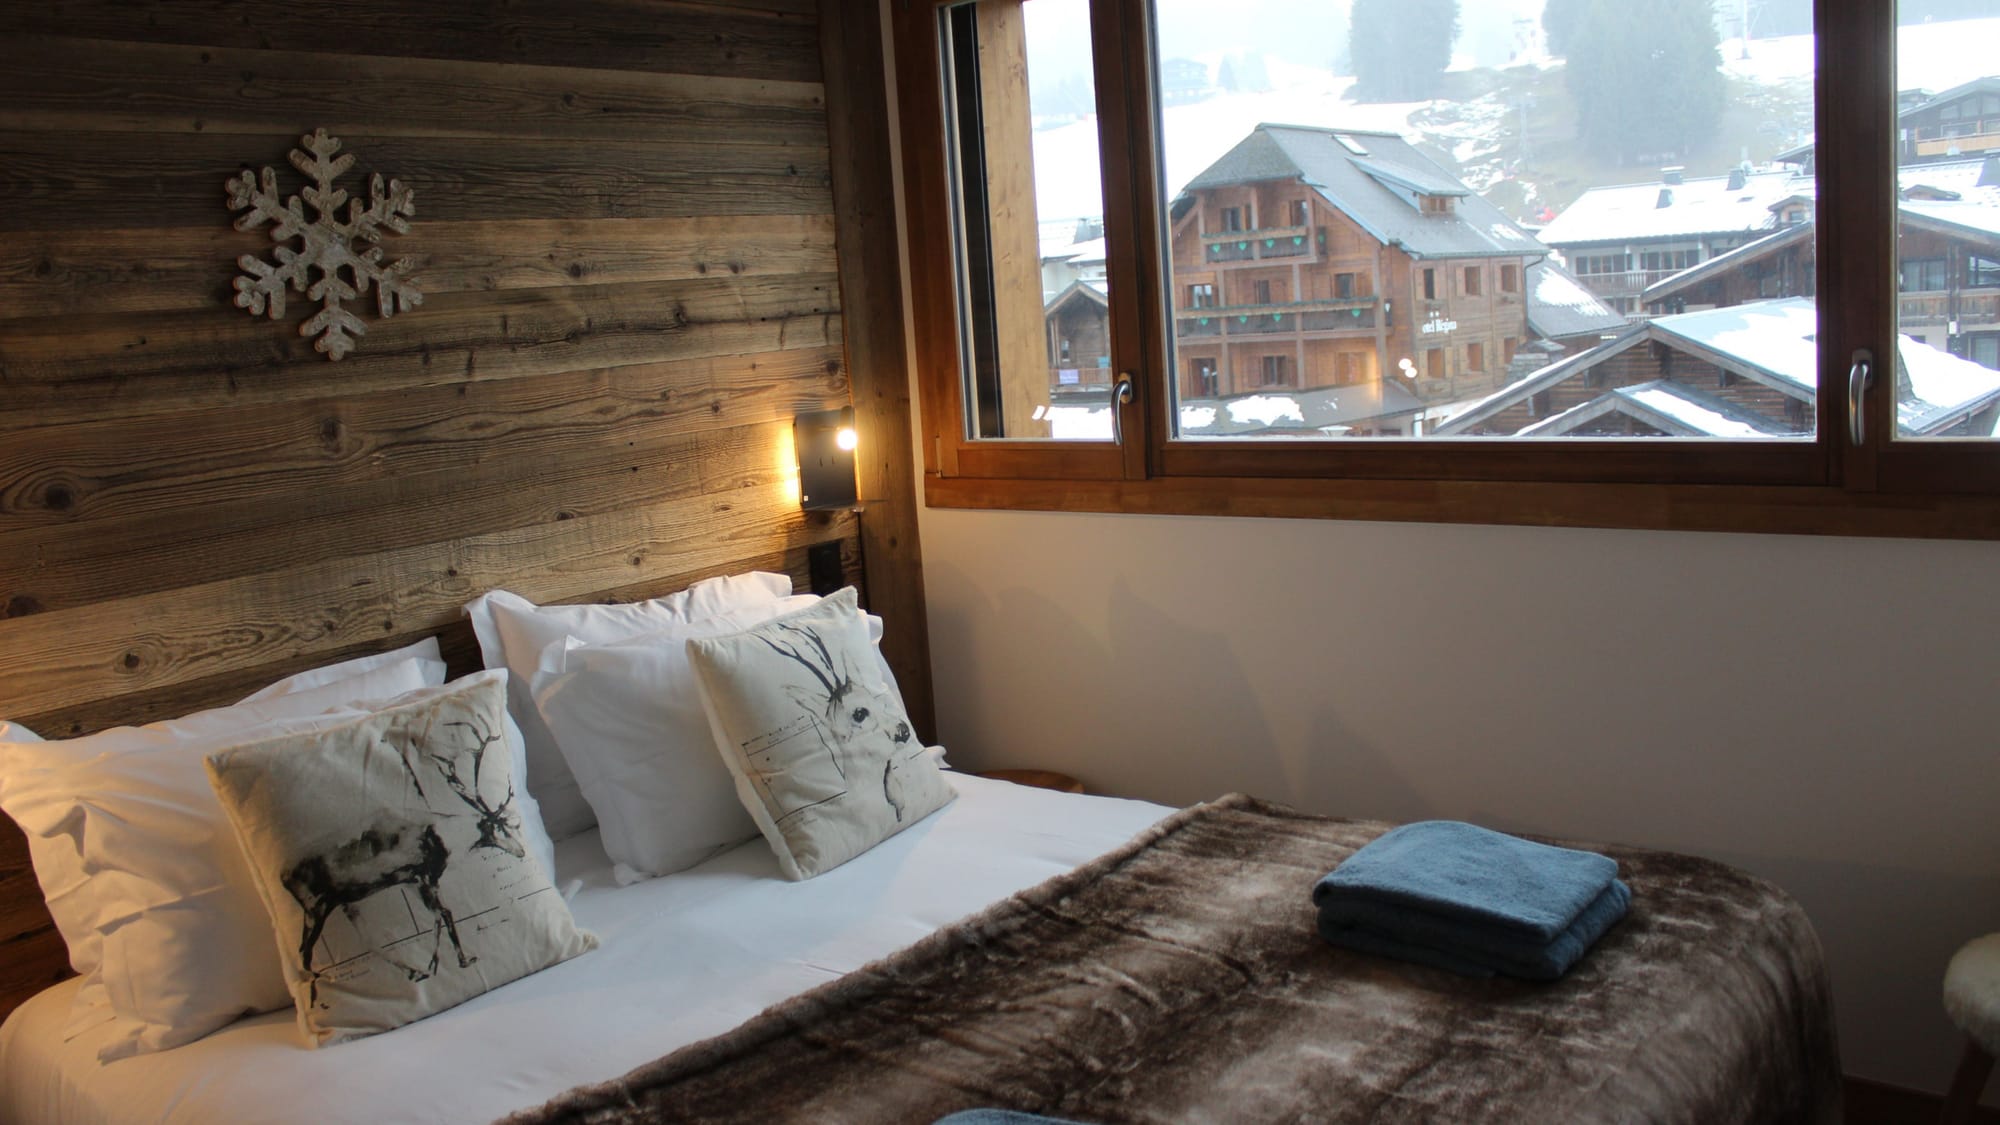 Master bedroom with view on snowy village and ski slopes